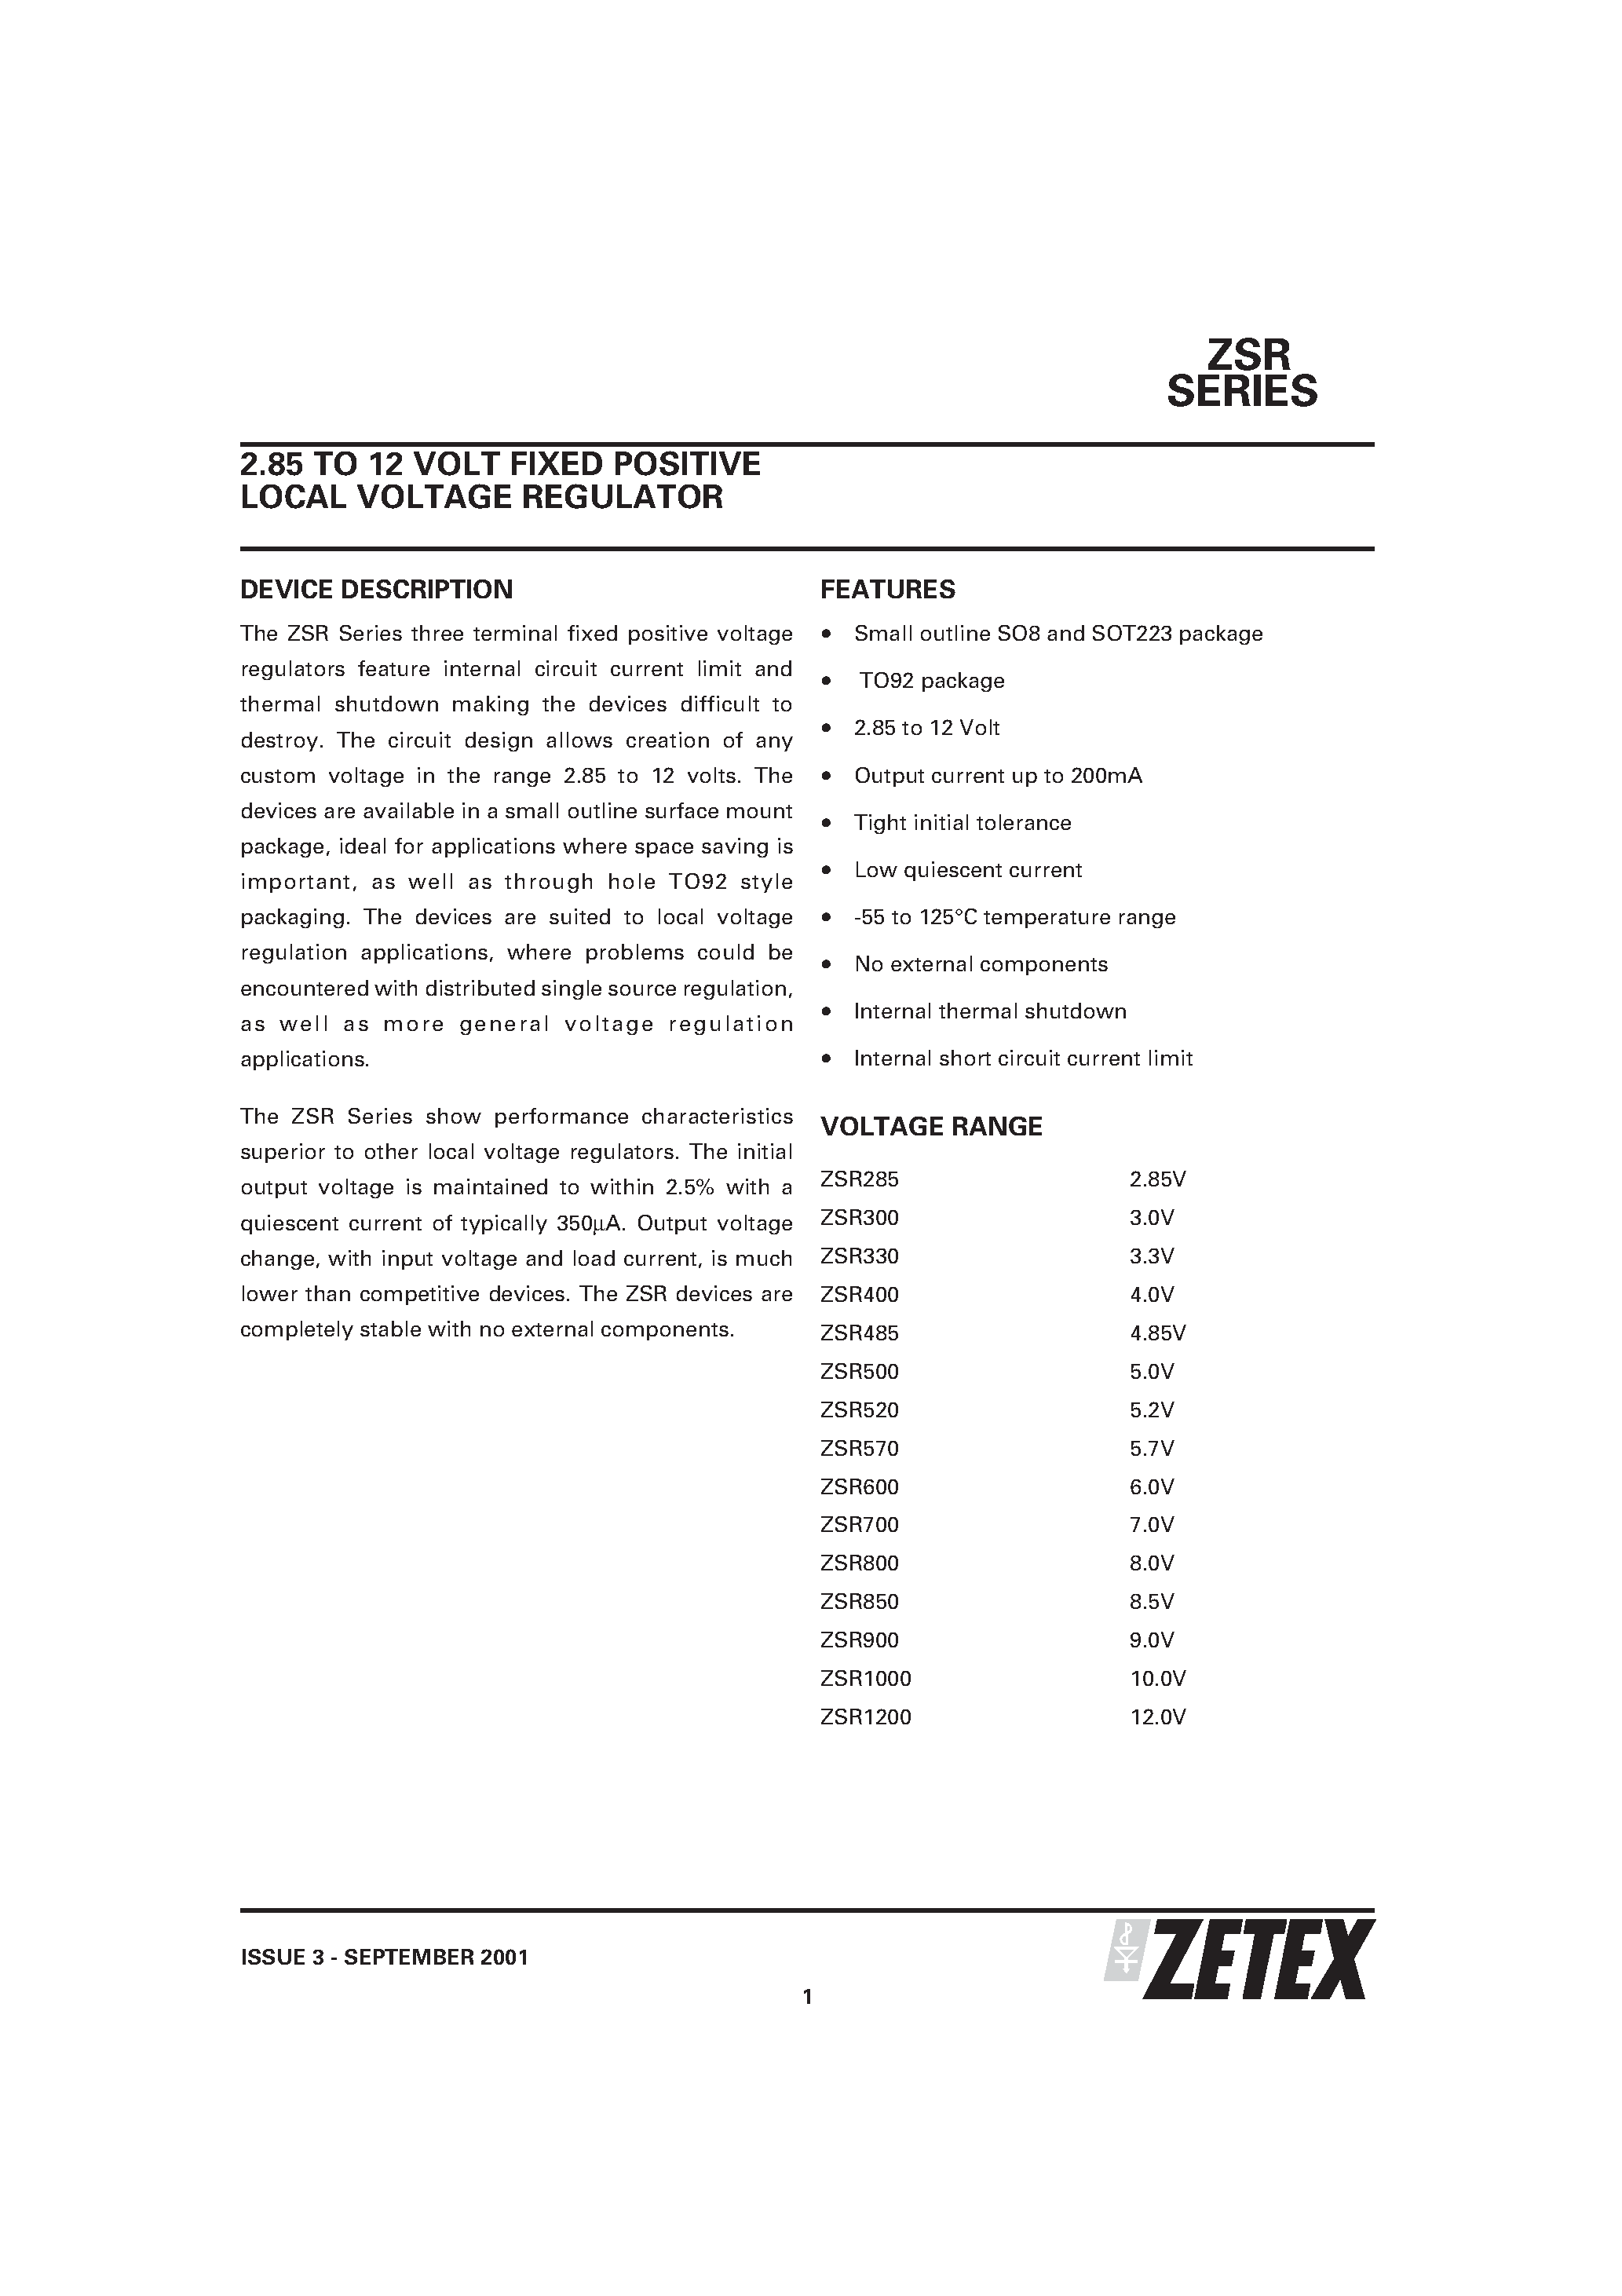 Datasheet ZSR330 - 2.85 TO 12 VOLT FIXED POSITIVE LOCAL VOLTAGE REGULATOR page 1